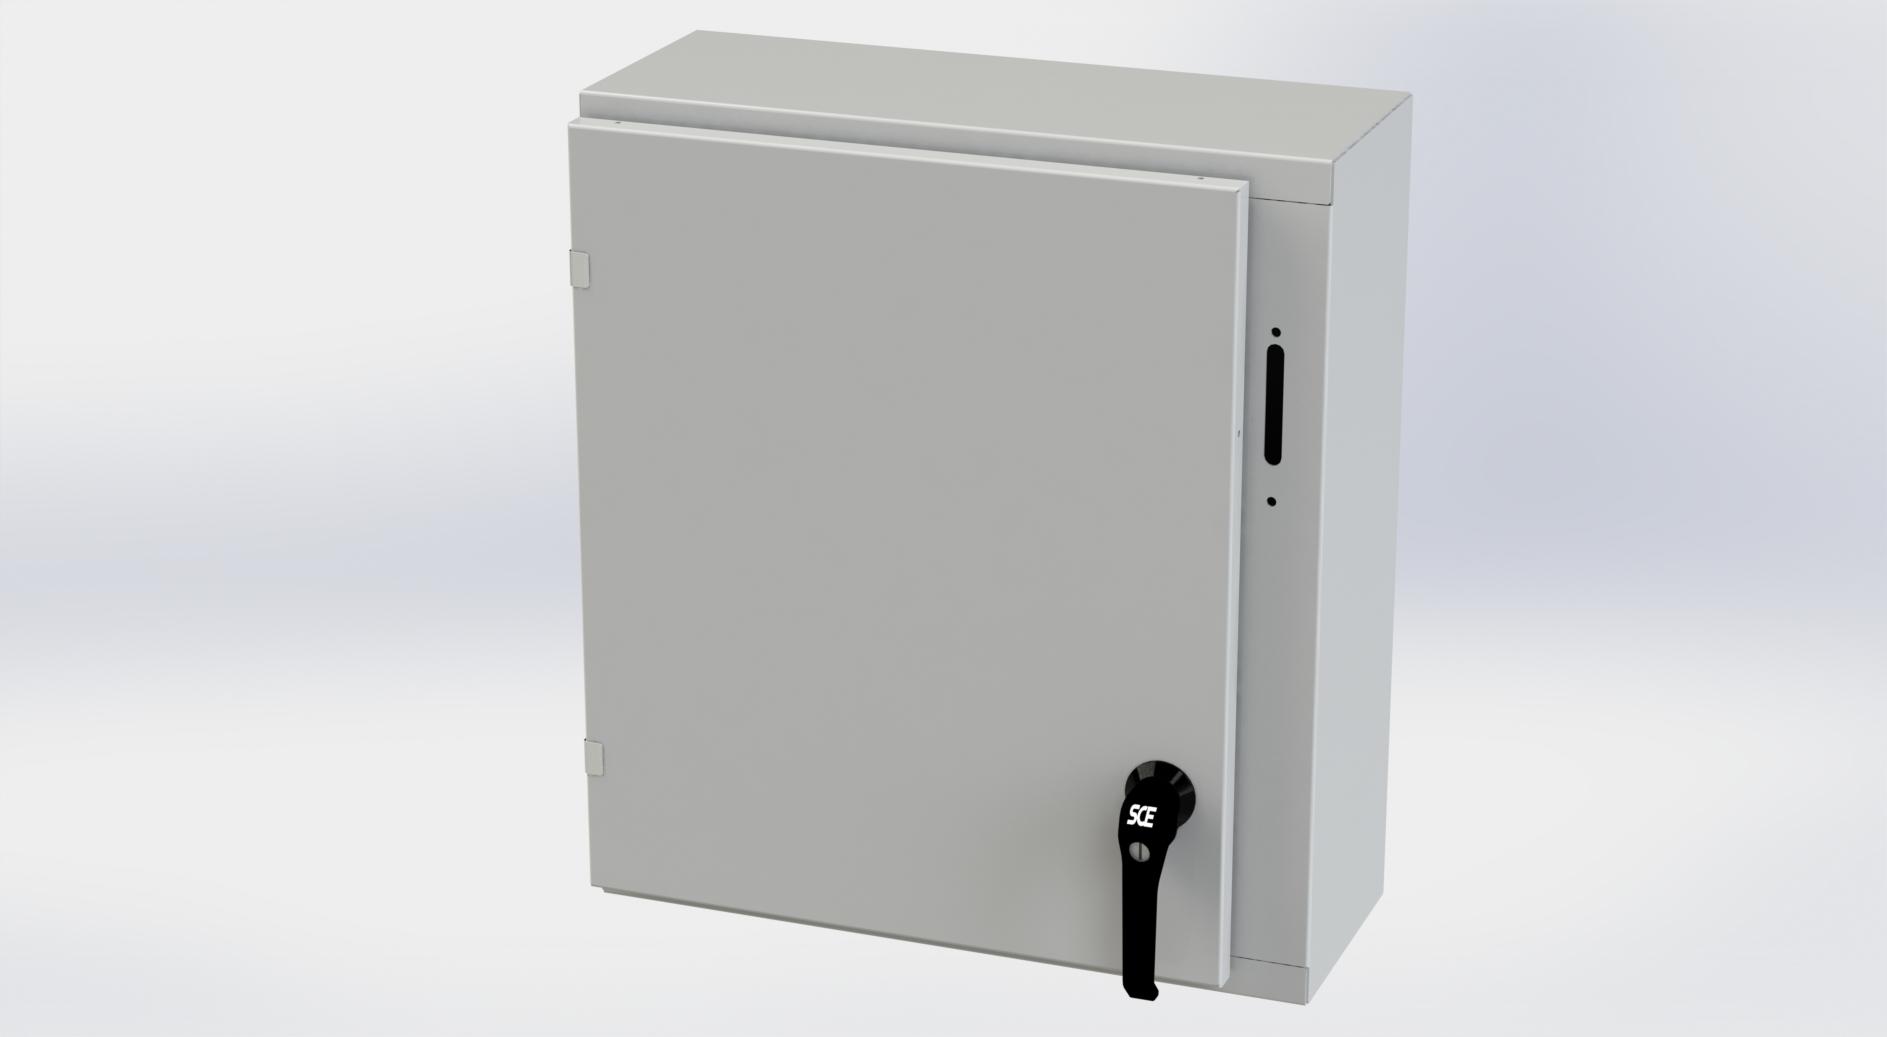 Saginaw Control SCE-24XEL2108LPLG XEL LP Enclosure, Height:24.00", Width:21.38", Depth:8.00", RAL 7035 gray powder coating inside and out. Optional sub-panels are powder coated white.